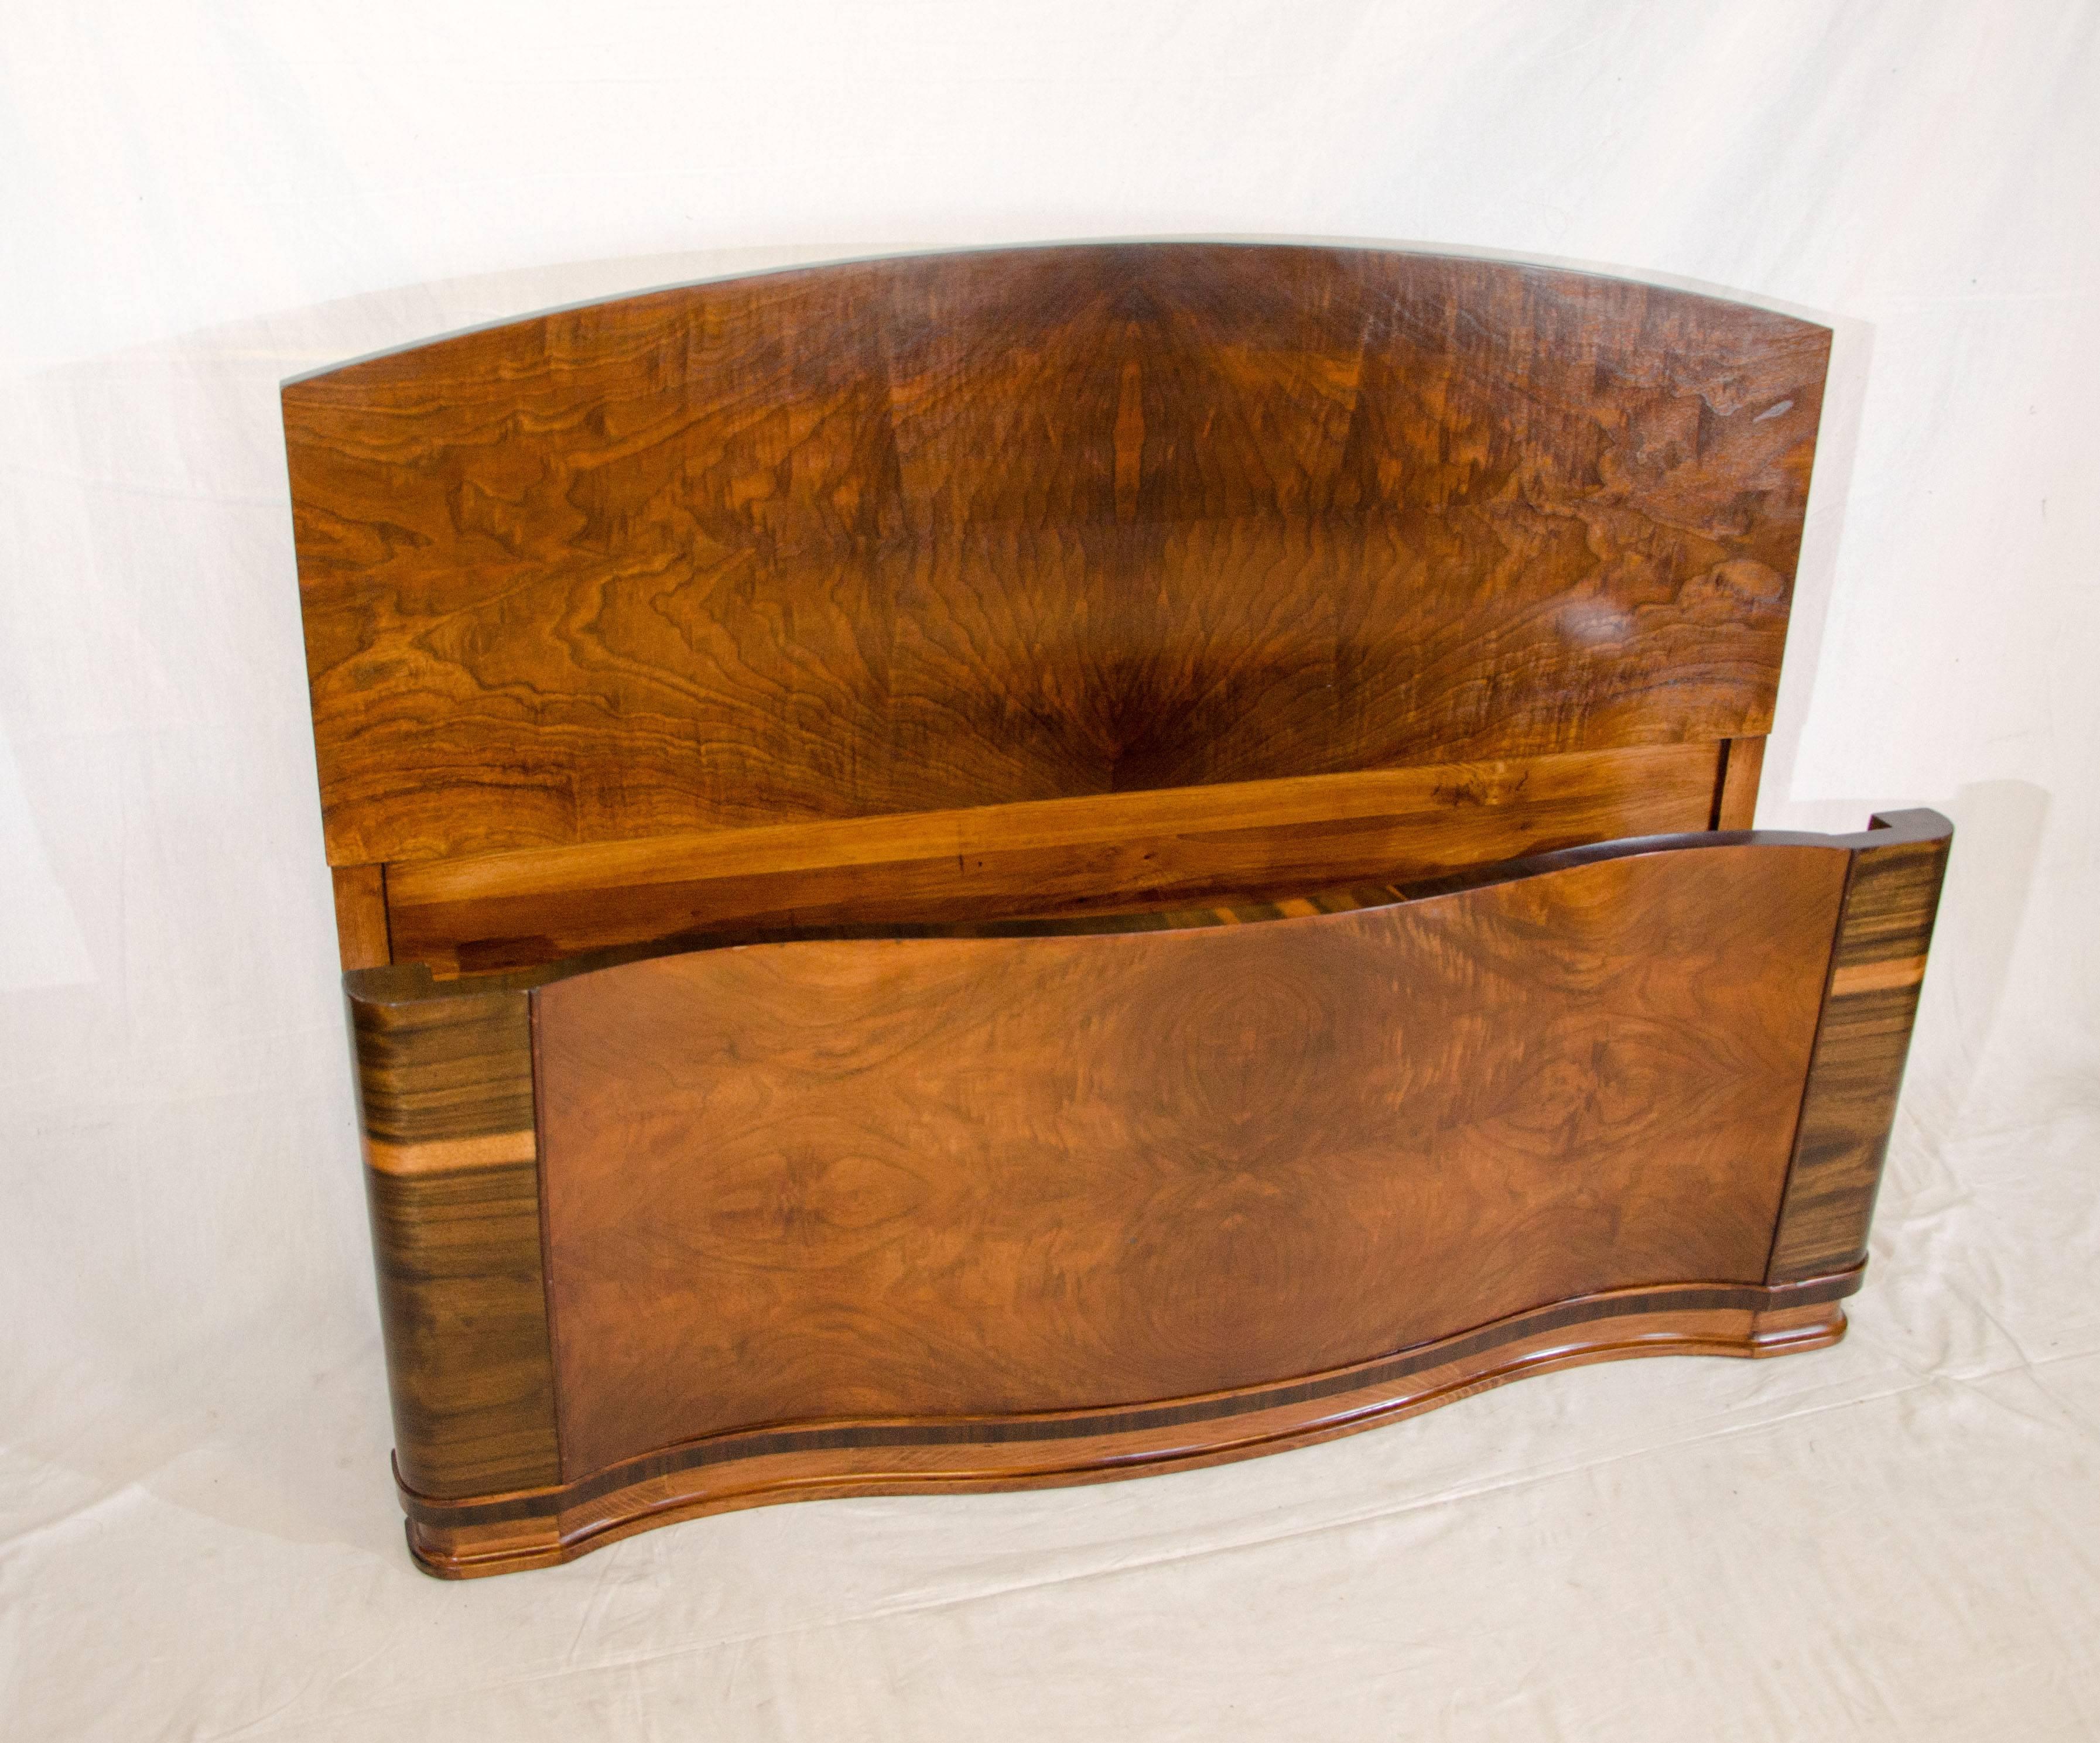  Very nice Art Deco walnut double bed frame with wooden side rails. Both the headboard and footboard are book-matched burl walnut. The headboard is arched and the footboard is serpentine. The bed will accommodate a standard full size mattress and a